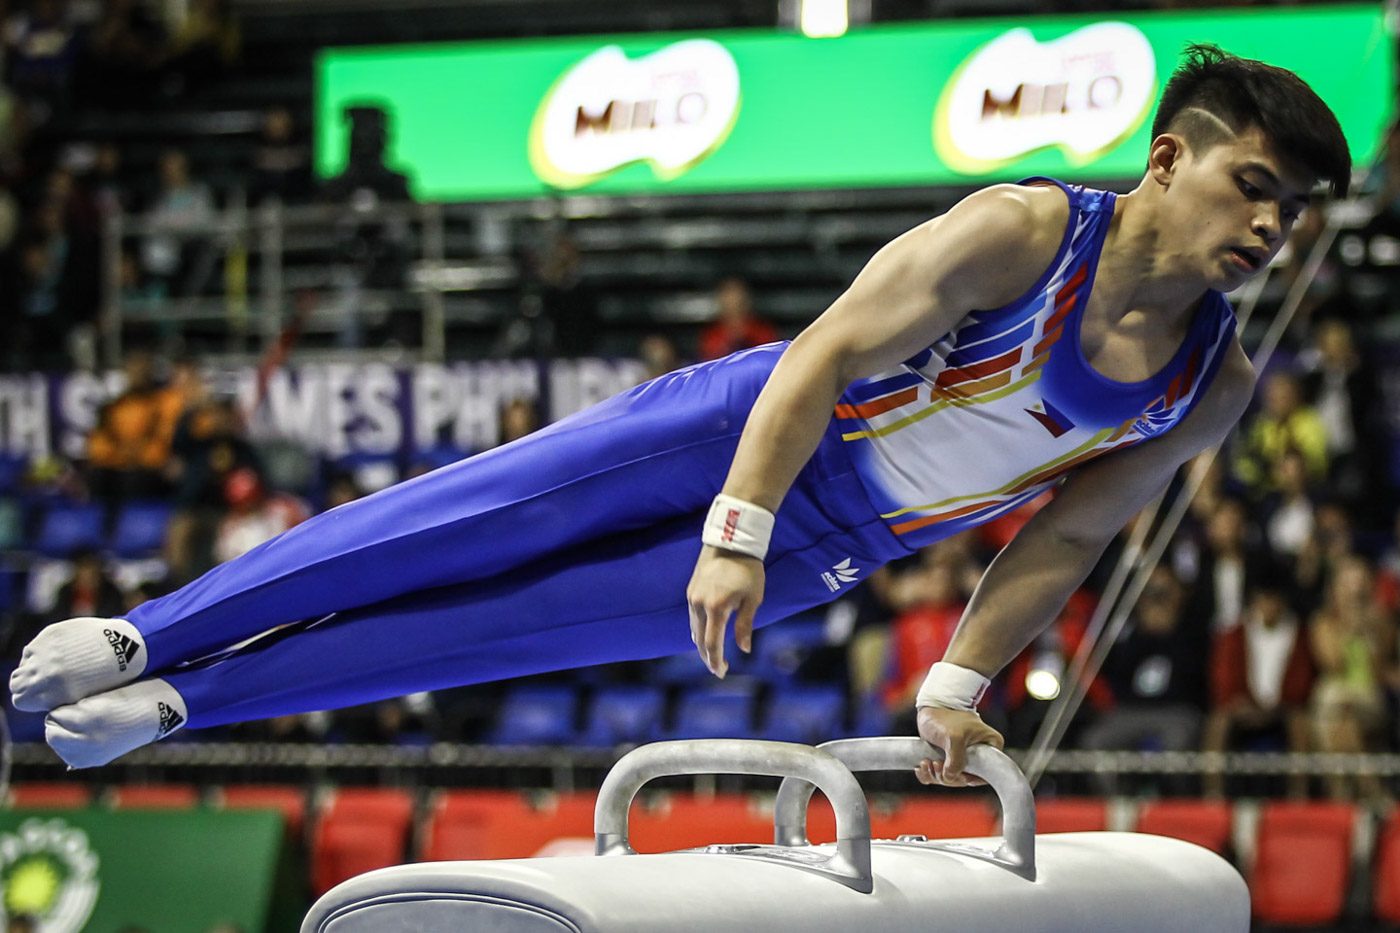 Carlos Yulo misses gymnastics sweep, settles for pommel silver